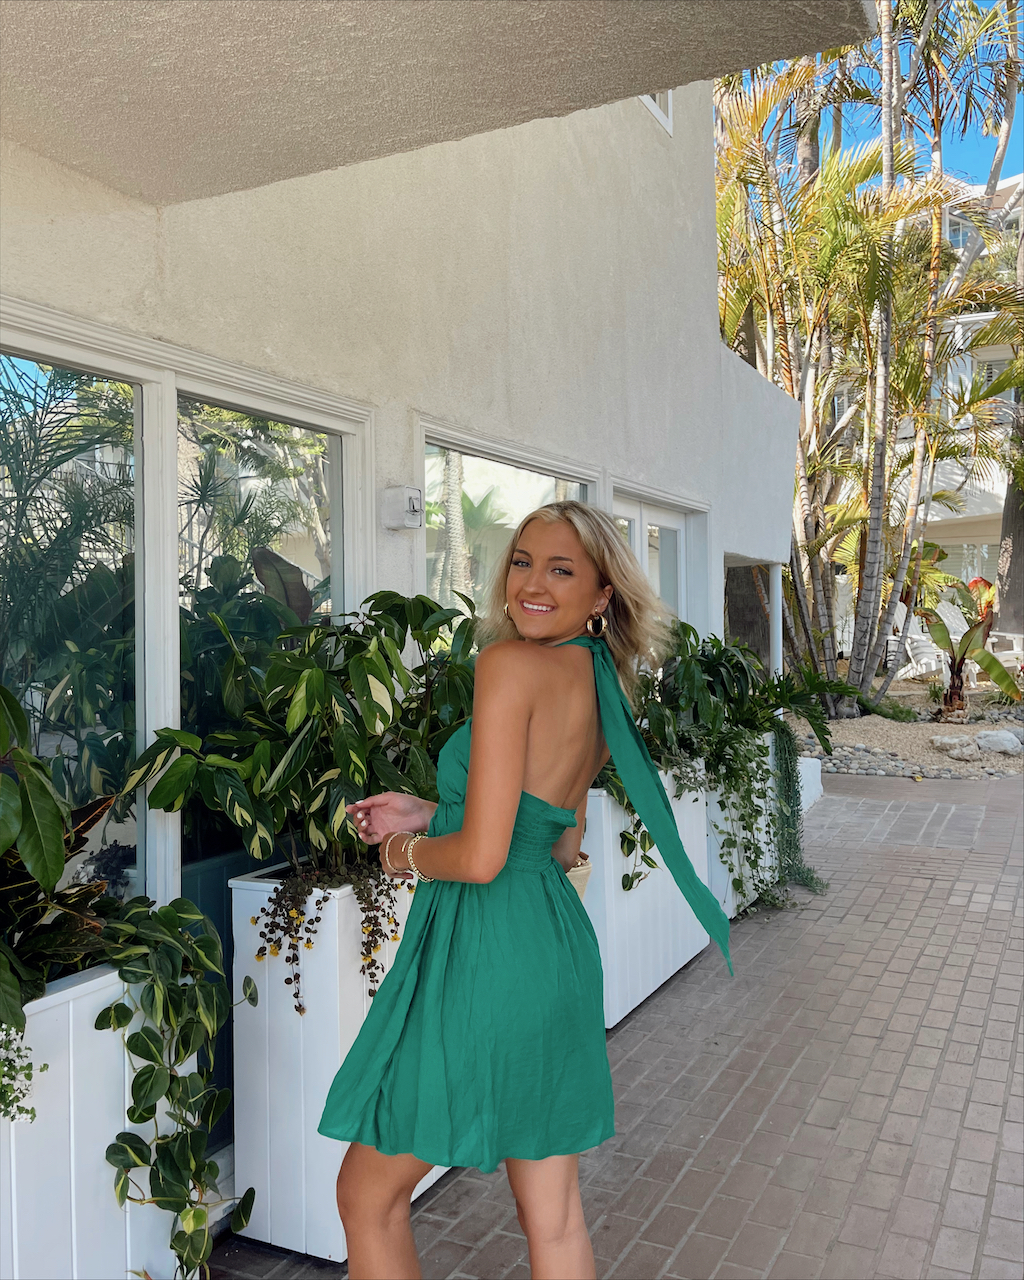 10 Outfits To Wear On Your Trip To Laguna Beach, CA